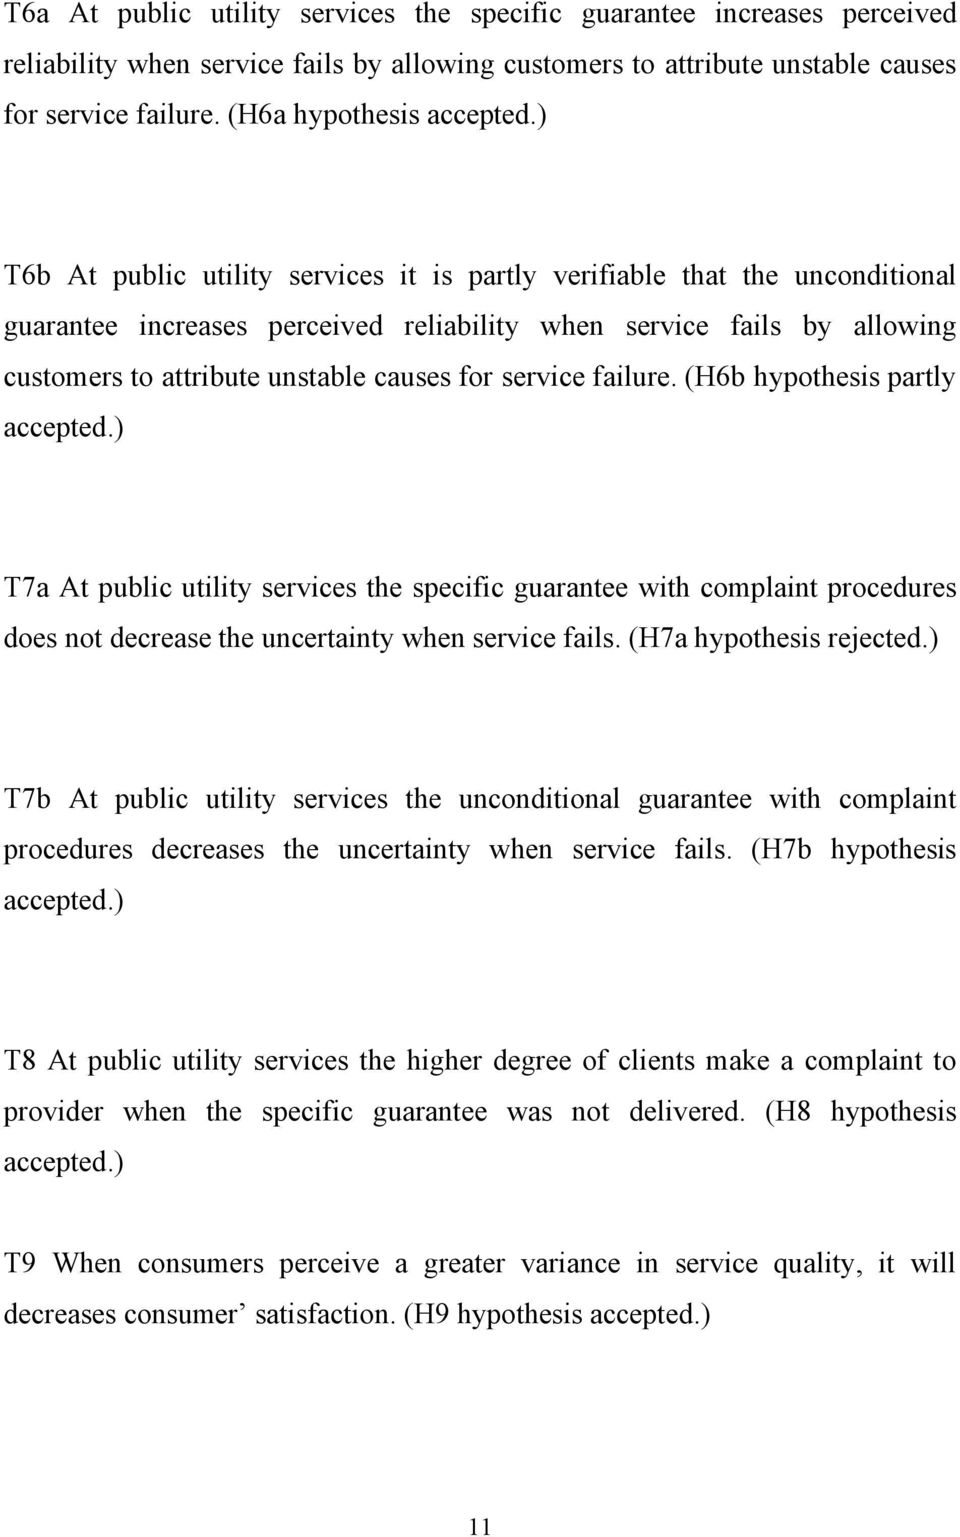 ) T6b At public utility services it is partly verifiable that the unconditional guarantee increases perceived reliability when service fails by allowing customers to attribute unstable causes for